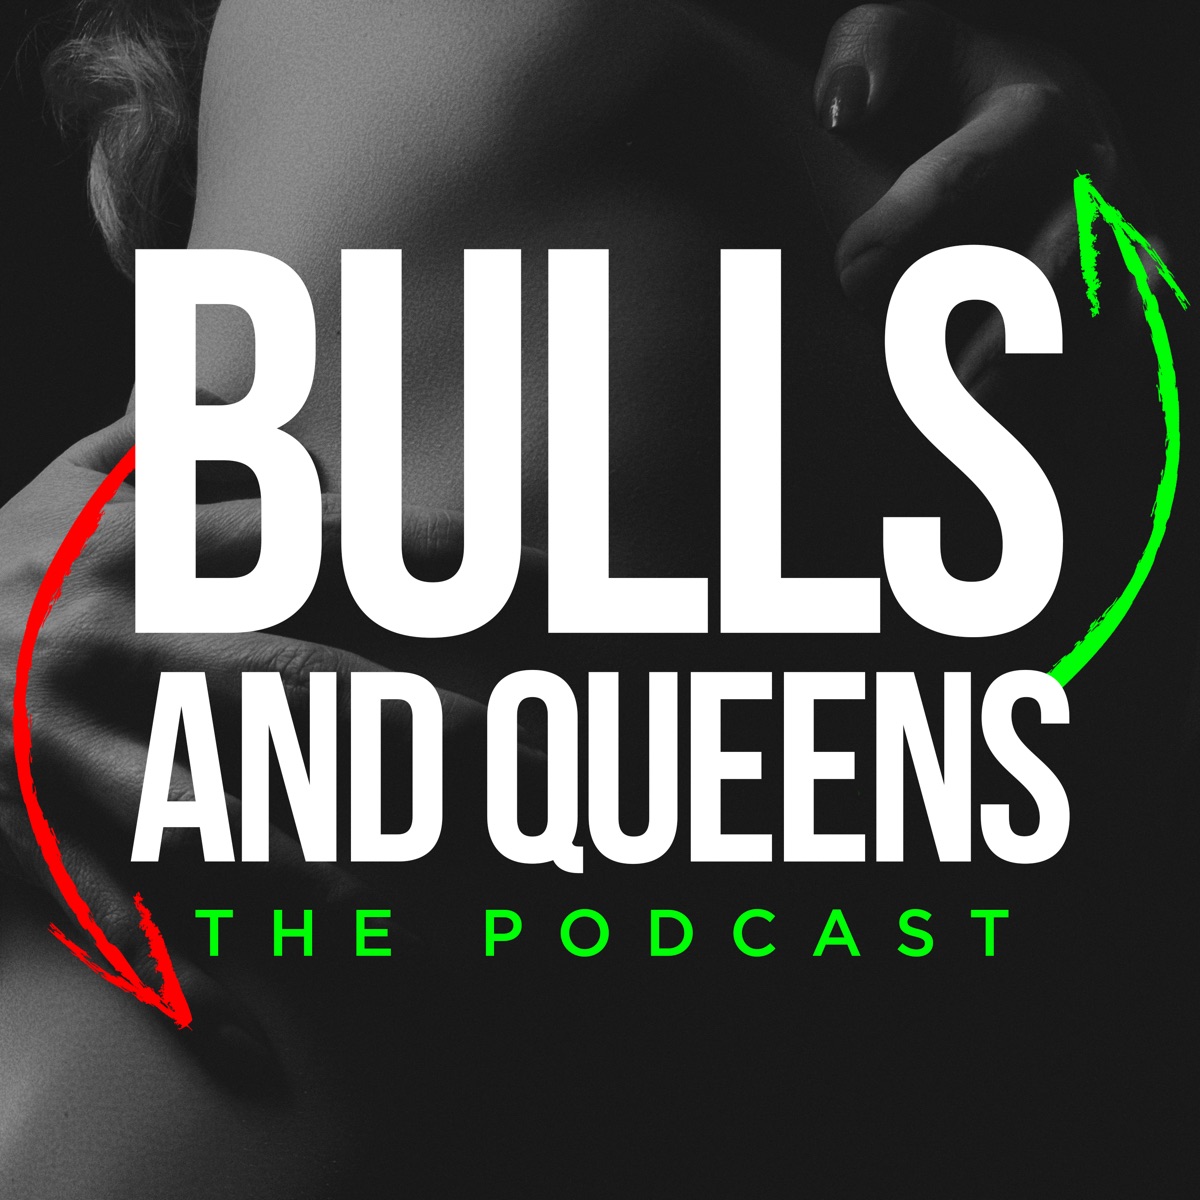 Bulls and Queens Swinger Podcast for Cuckolds Hotwives and Bulls – Podcast